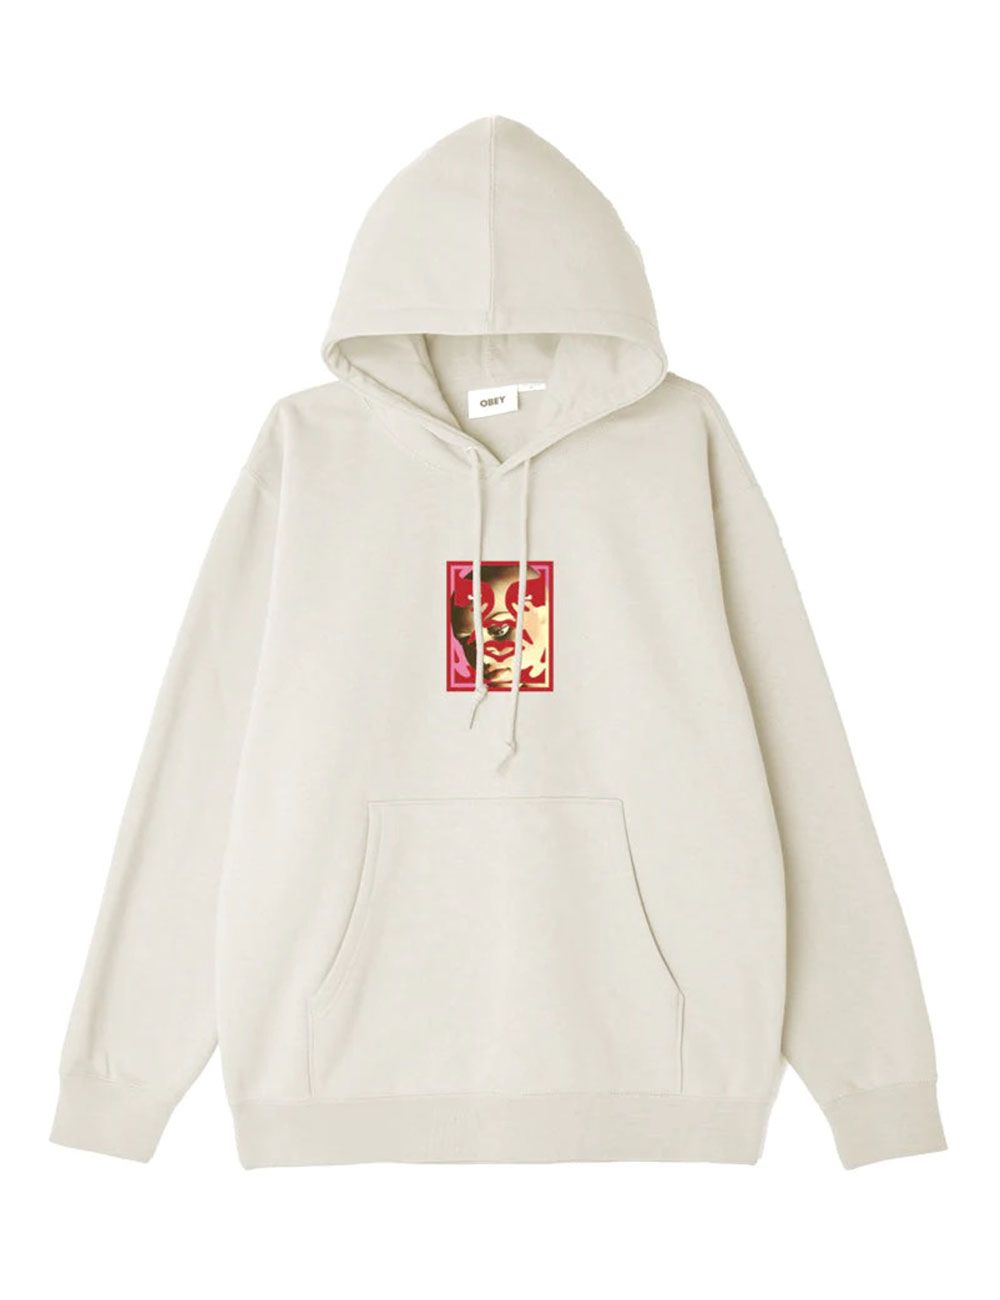 Obey OBEY DOUBLE FACE PREMIUM HOODIE unbleached